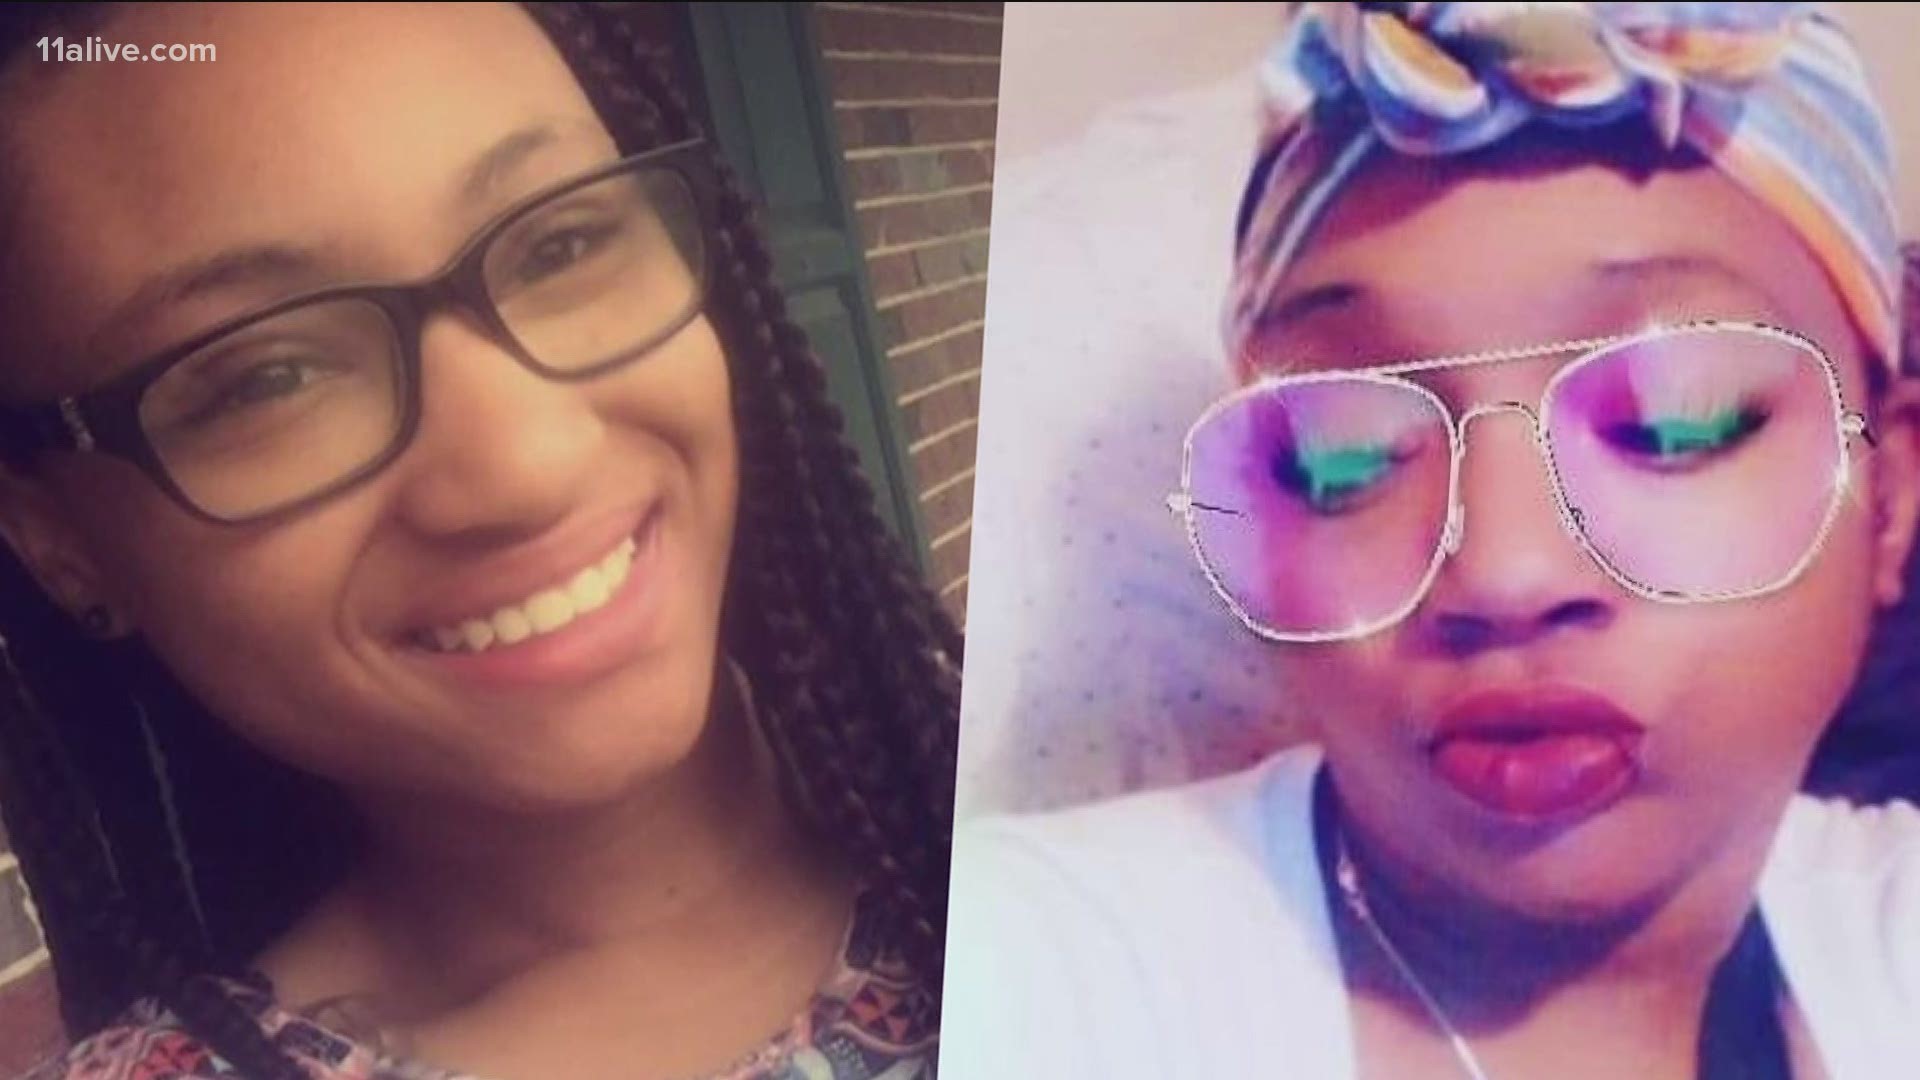 Truvenia Campbell, 31, and Vanita Richardson, 19, were killed – just days before Richardson was set to graduate high school this past May.